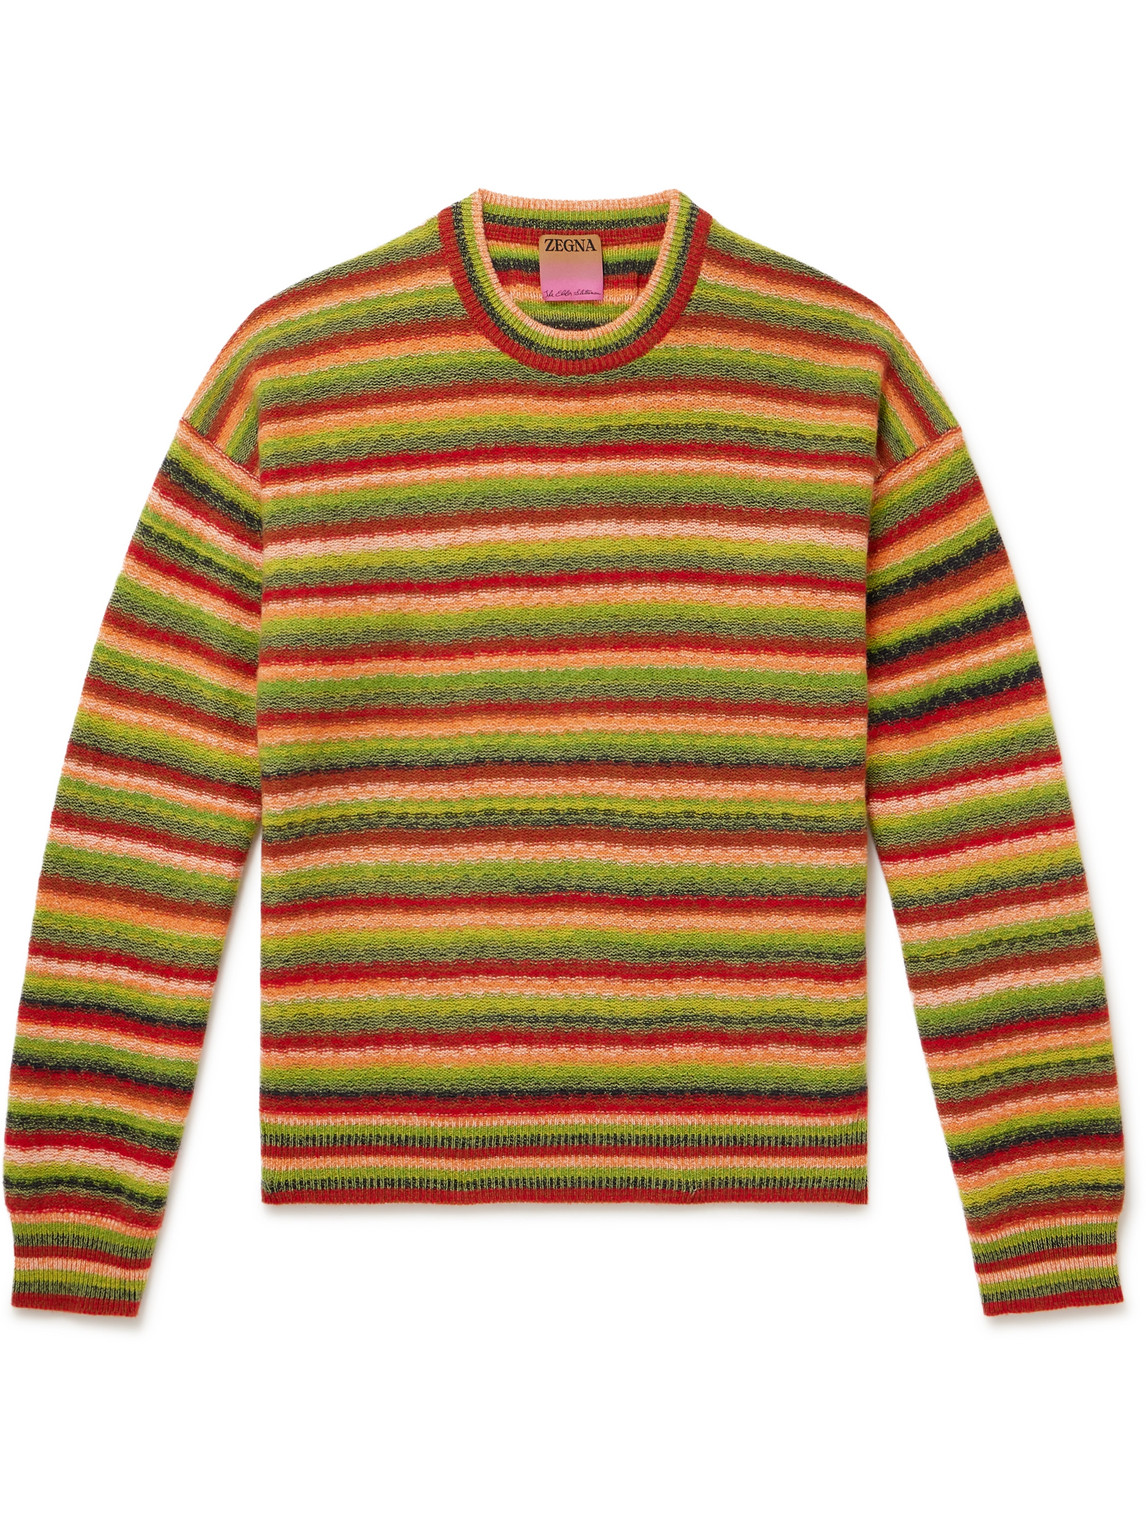 ZEGNA X THE ELDER STATESMAN STRIPED OASI CASHMERE AND WOOL-BLEND SWEATER